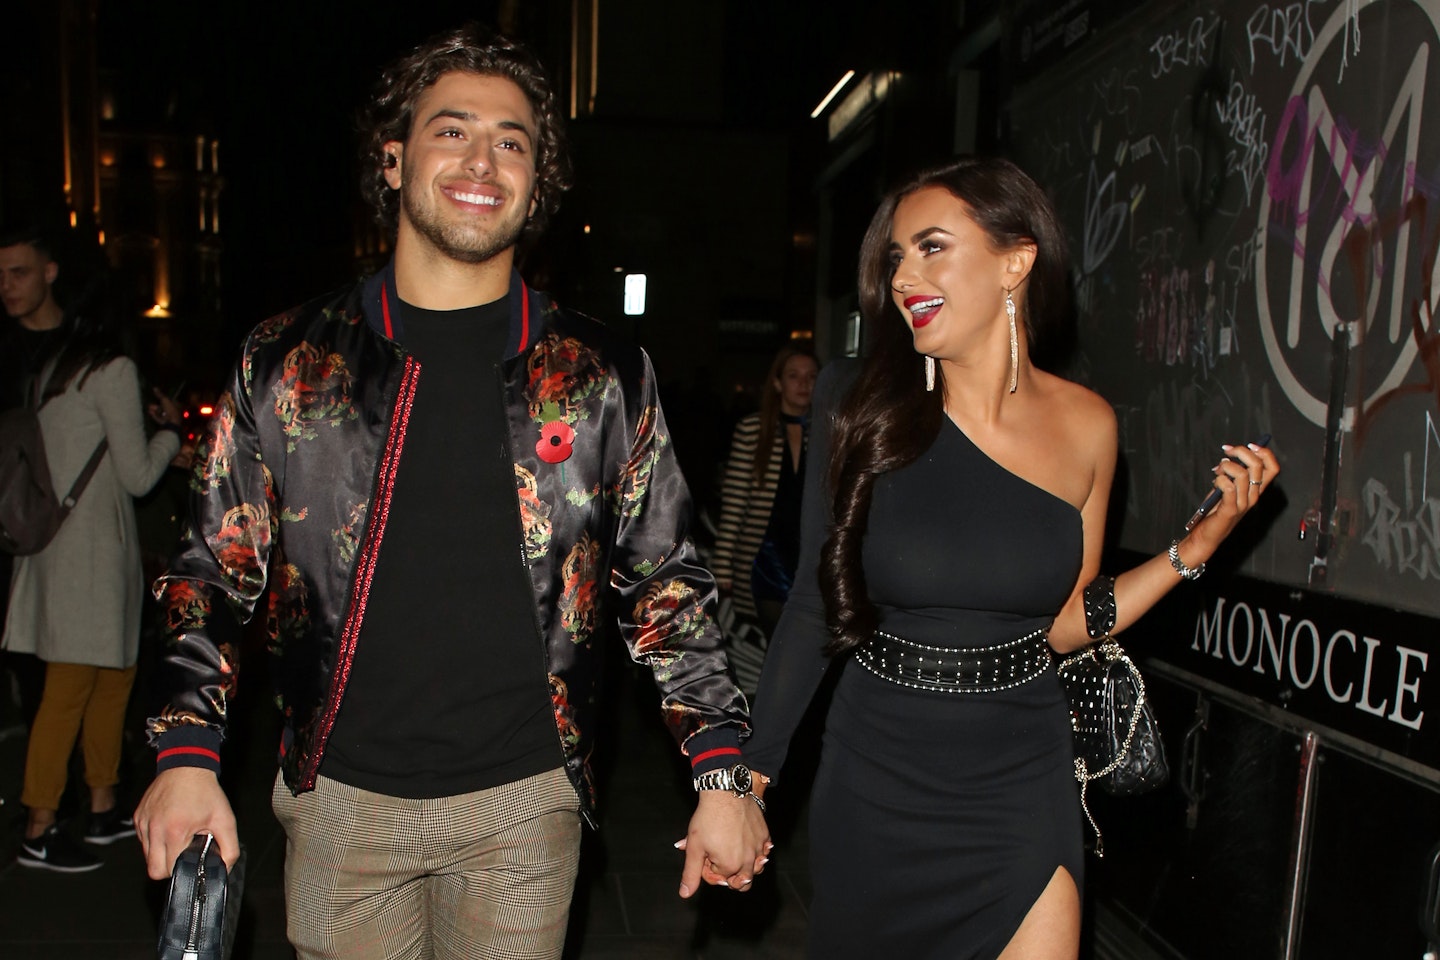 Kem Cetinay and Amber Davies getting back together